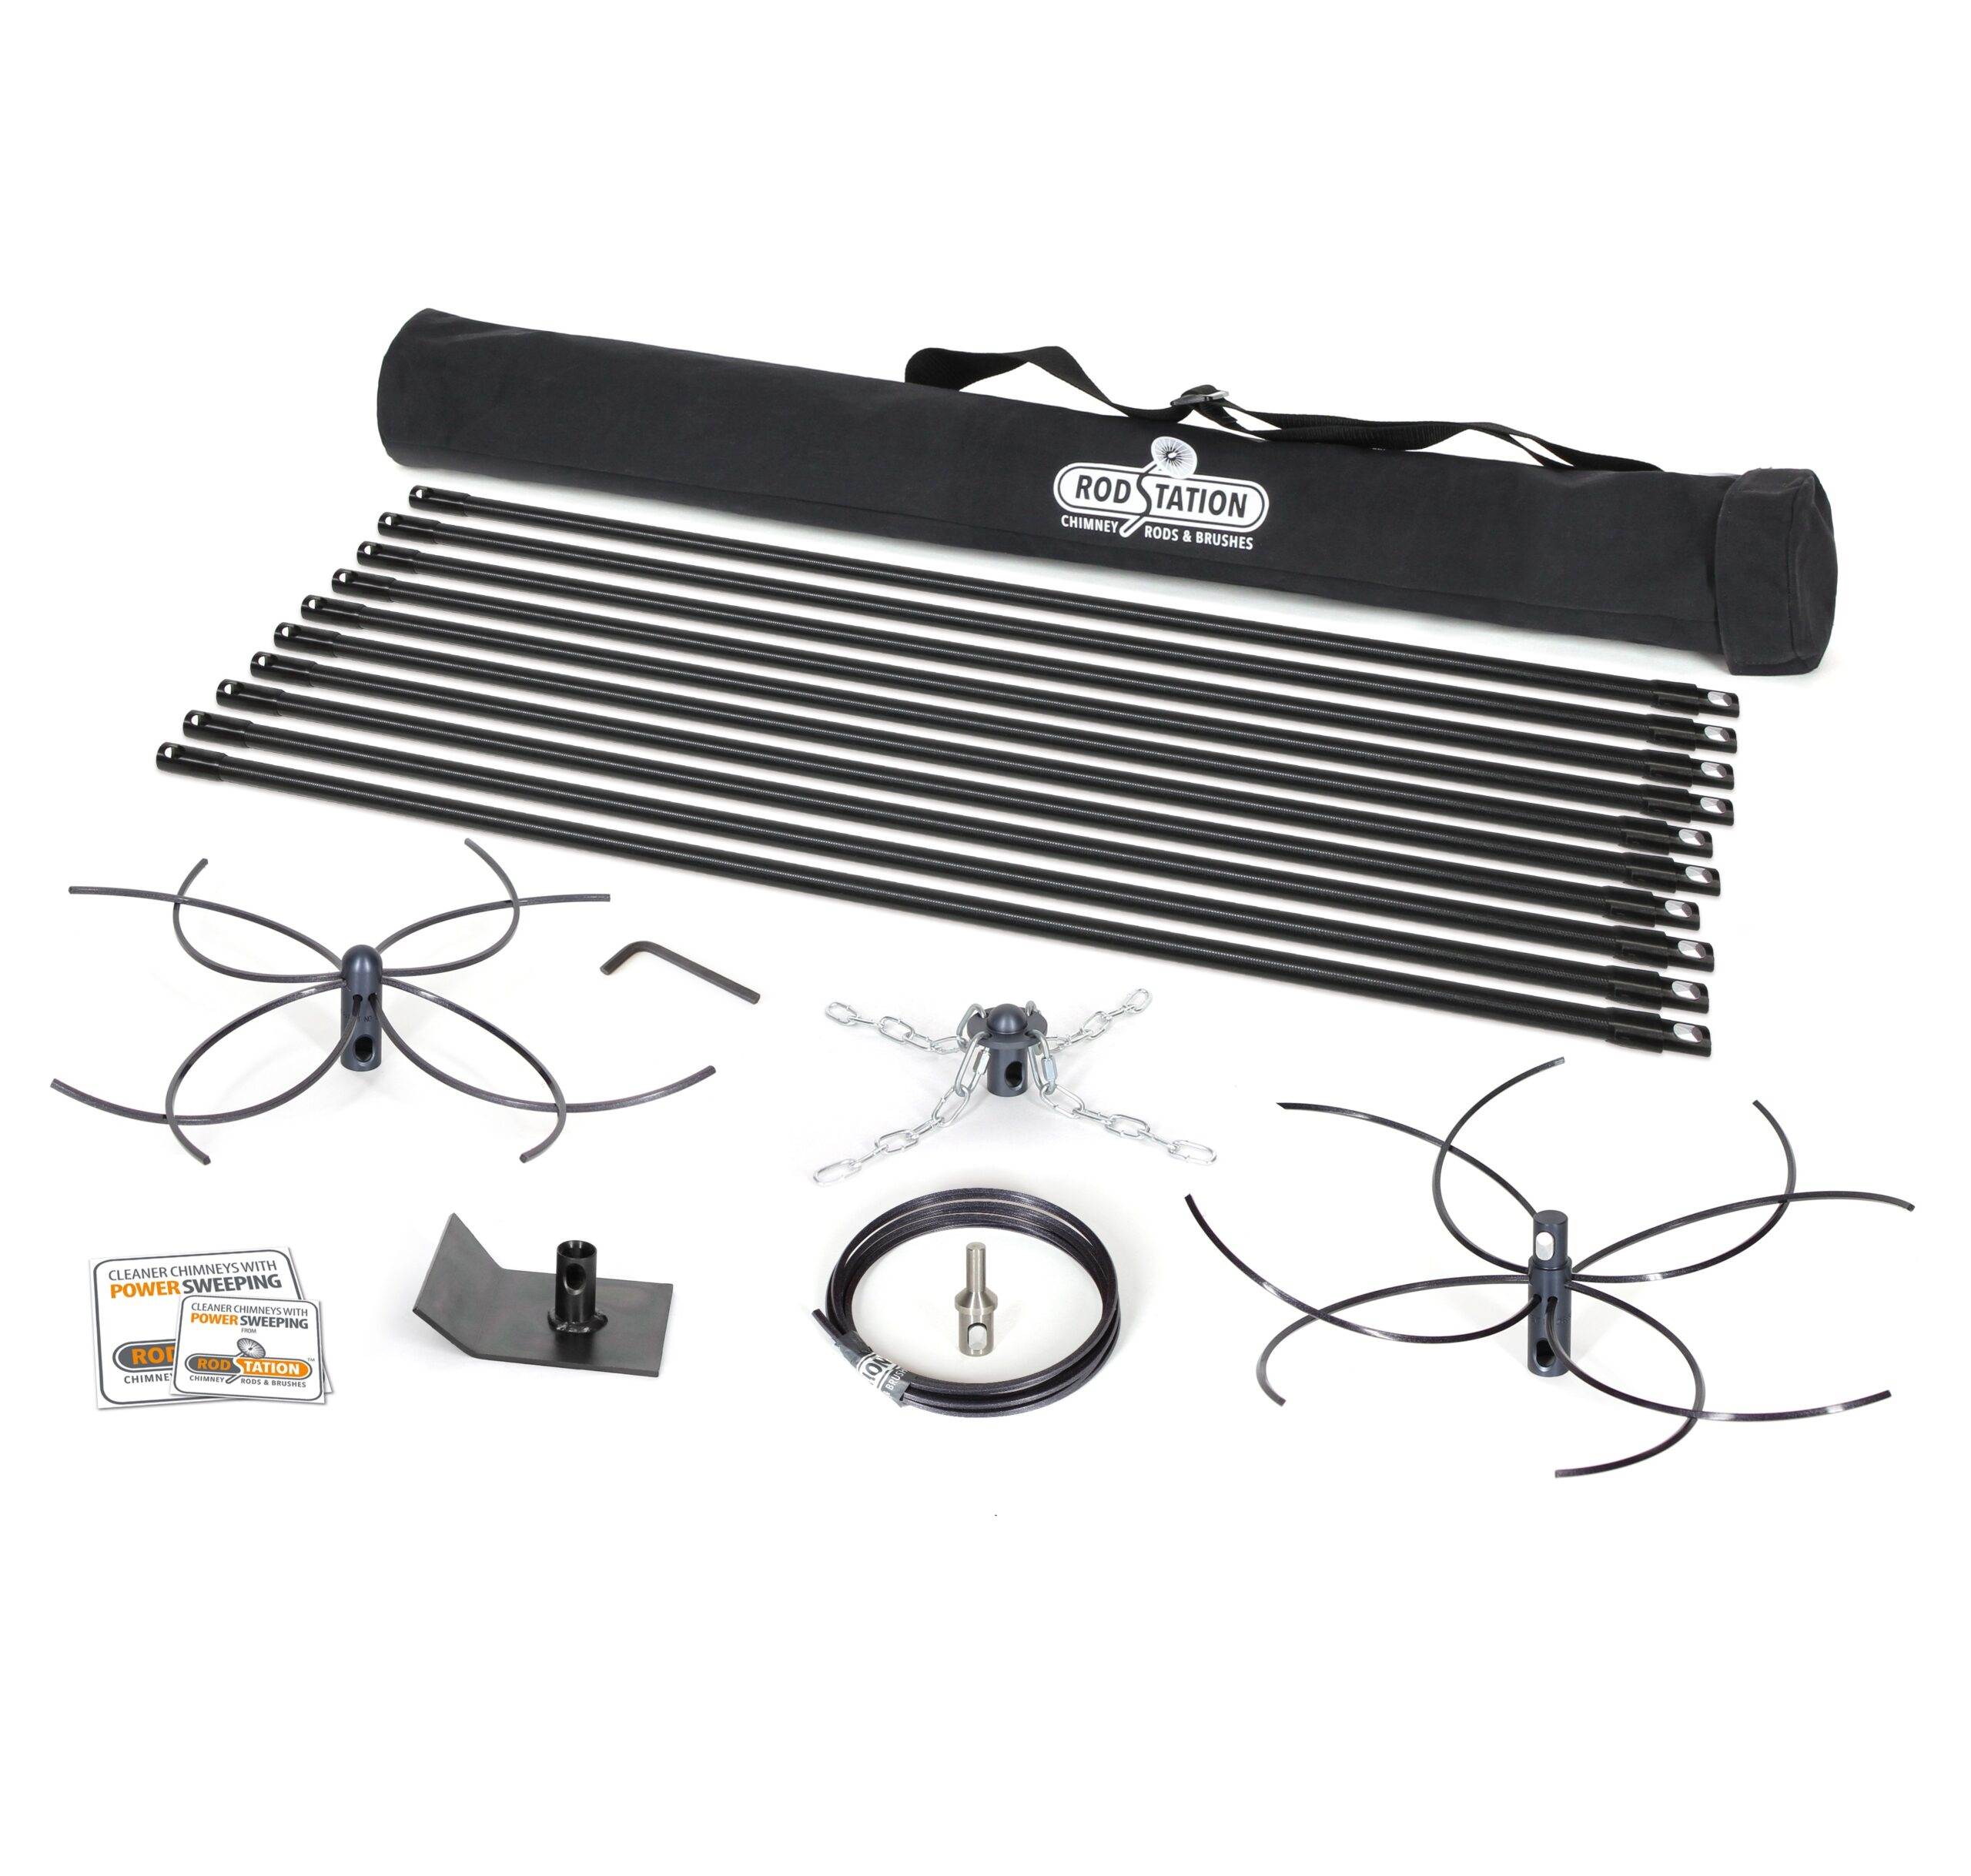 Chimney power sweeping kit for open fires and large chimneys